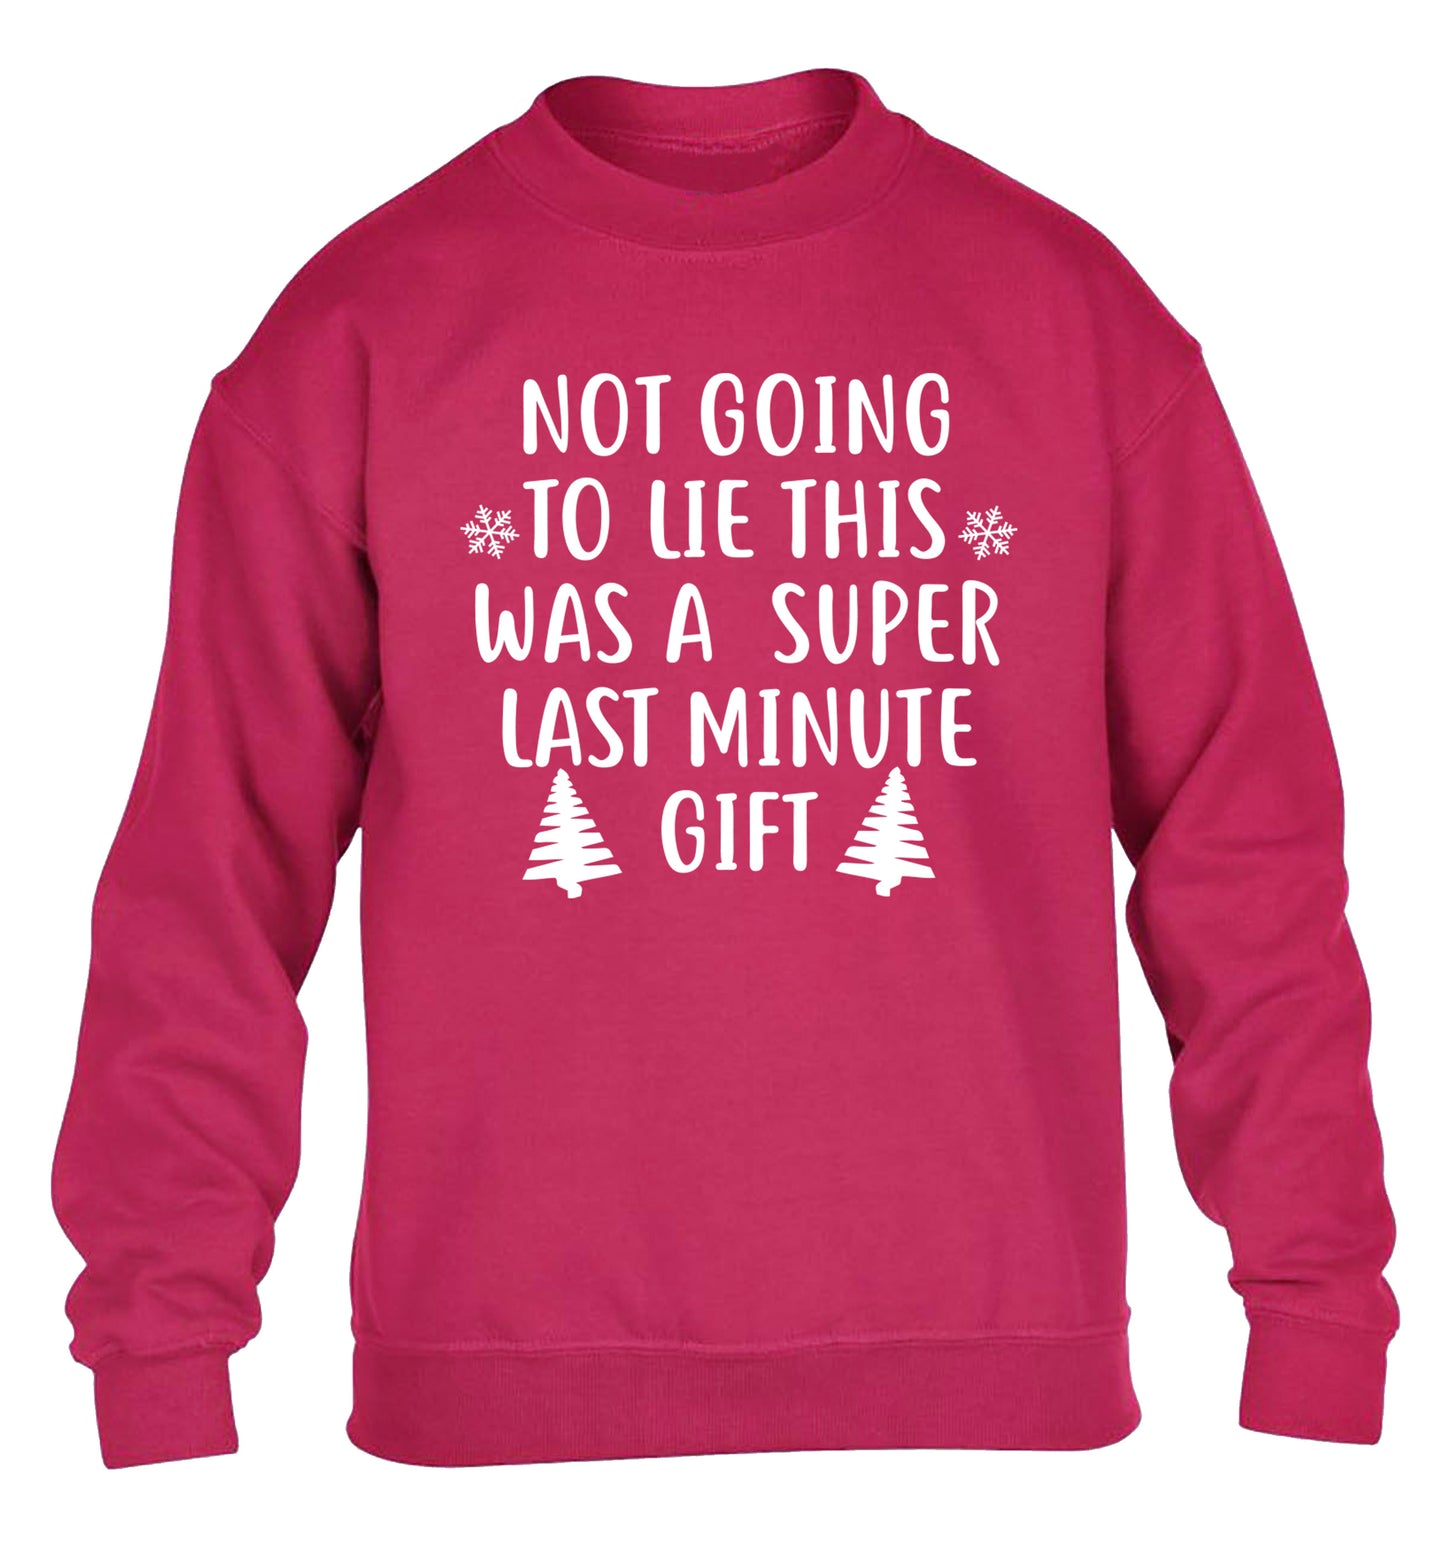 Not going to lie this was a super last minute gift children's pink sweater 12-13 Years